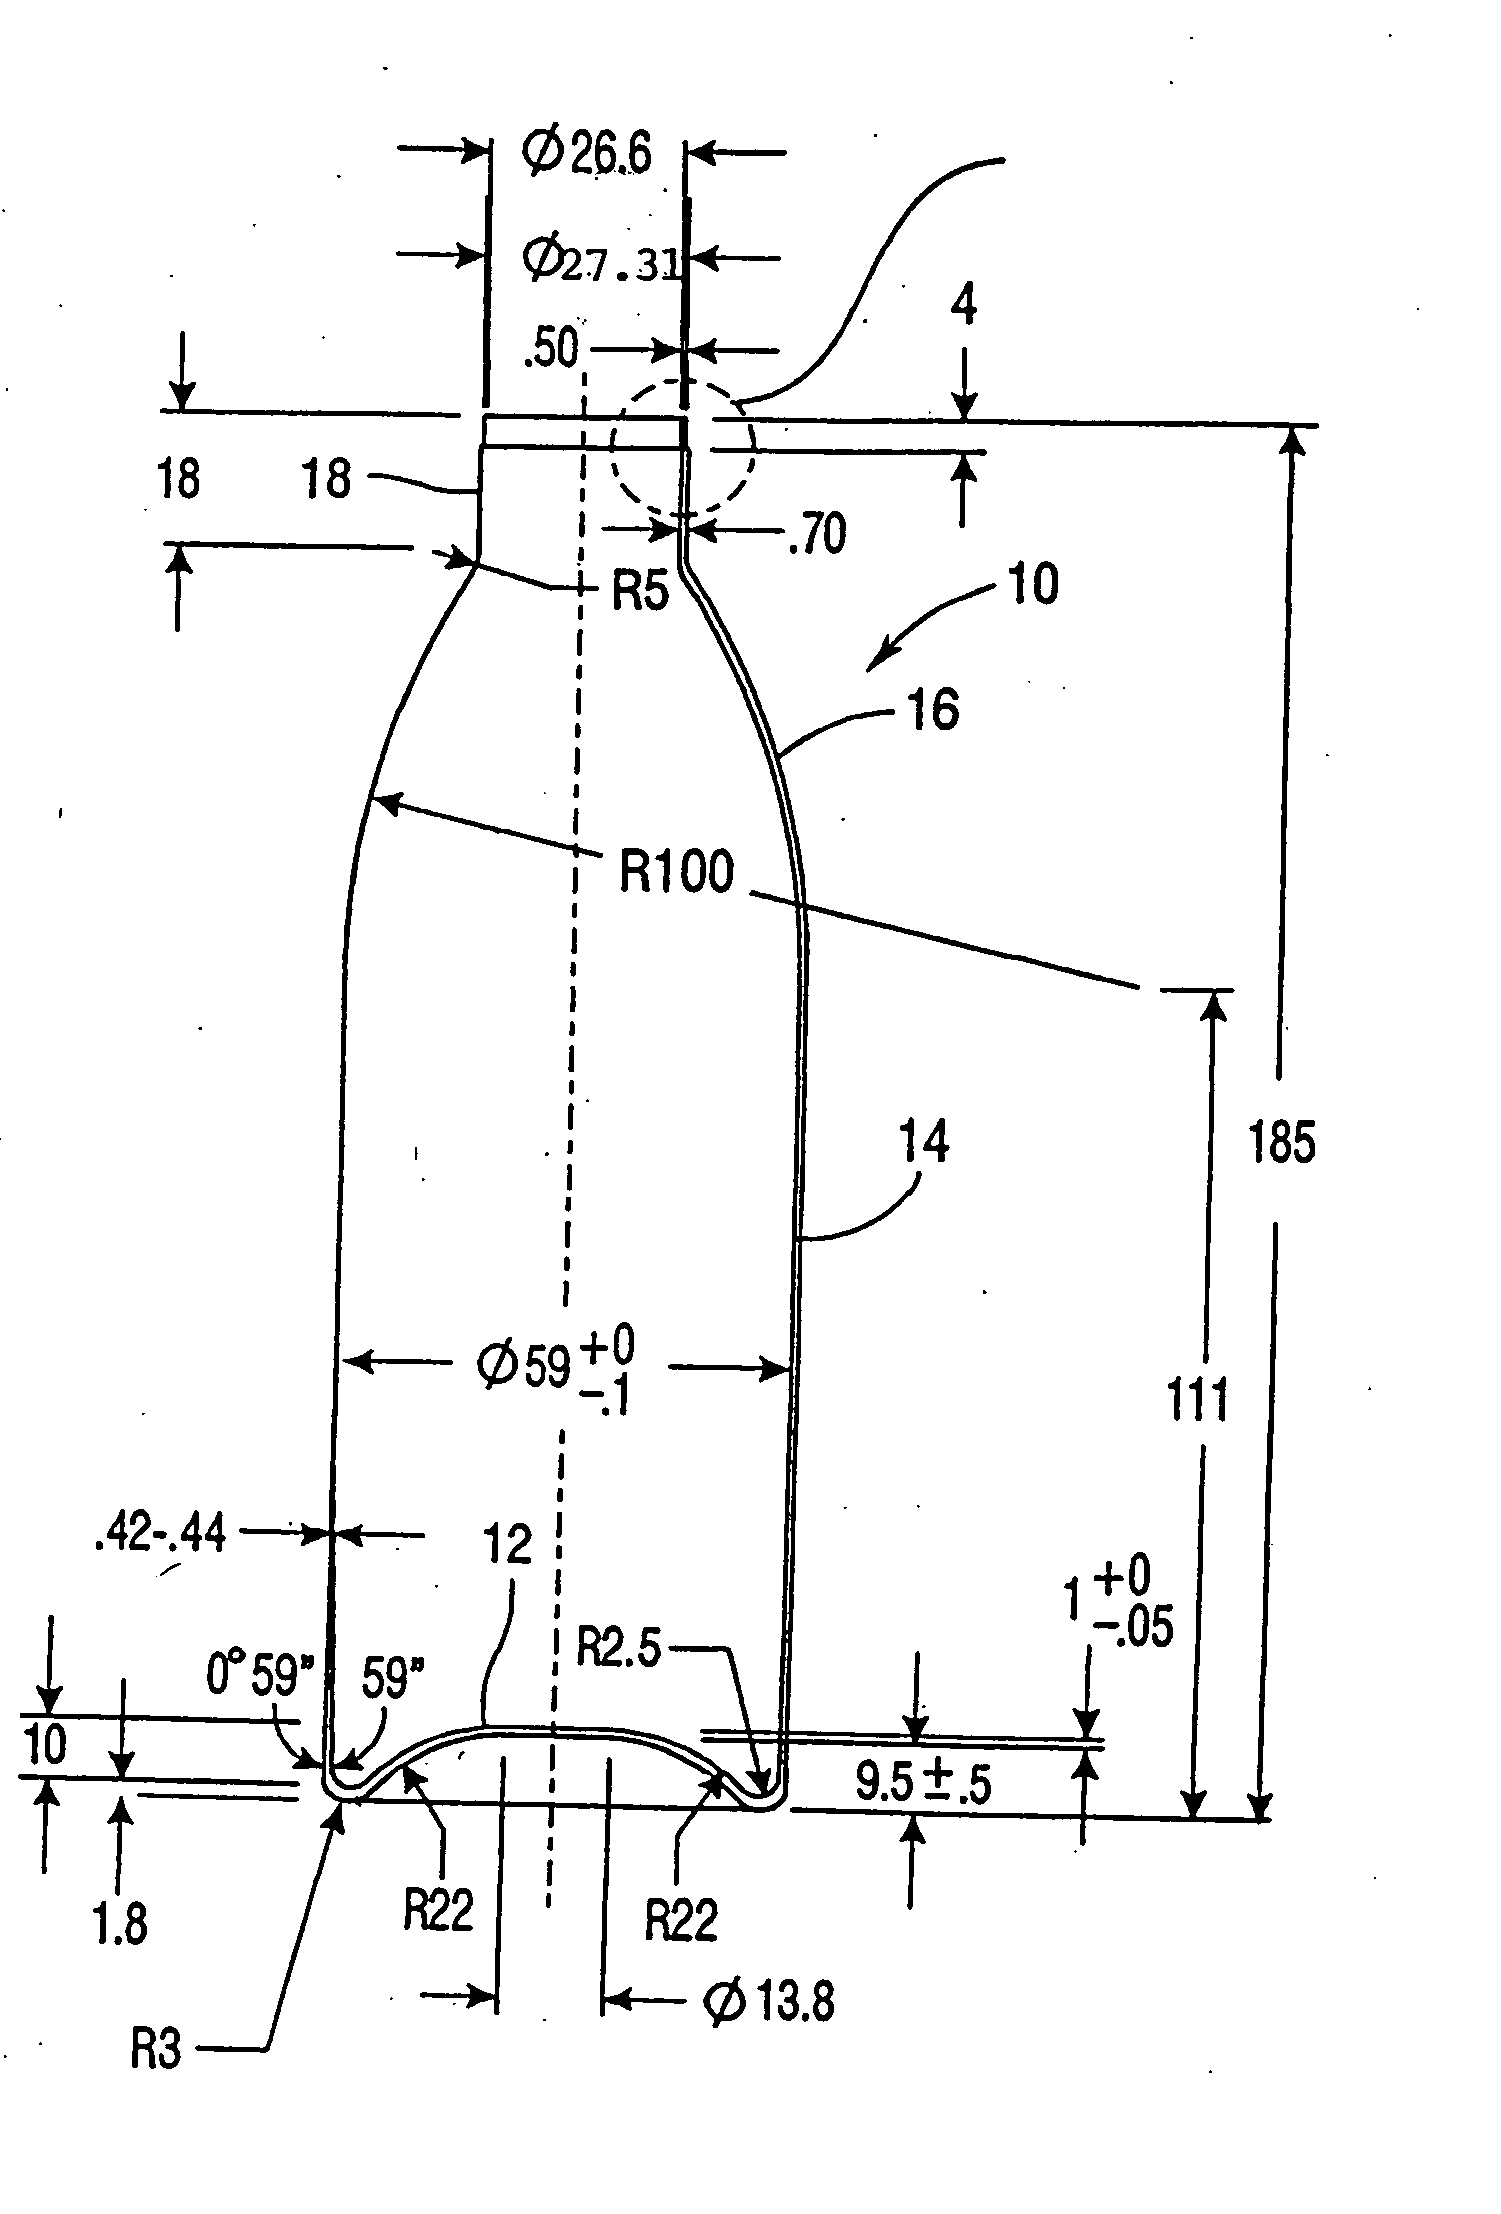 Method of manufacturing an aluminum receptacle with threaded outsert